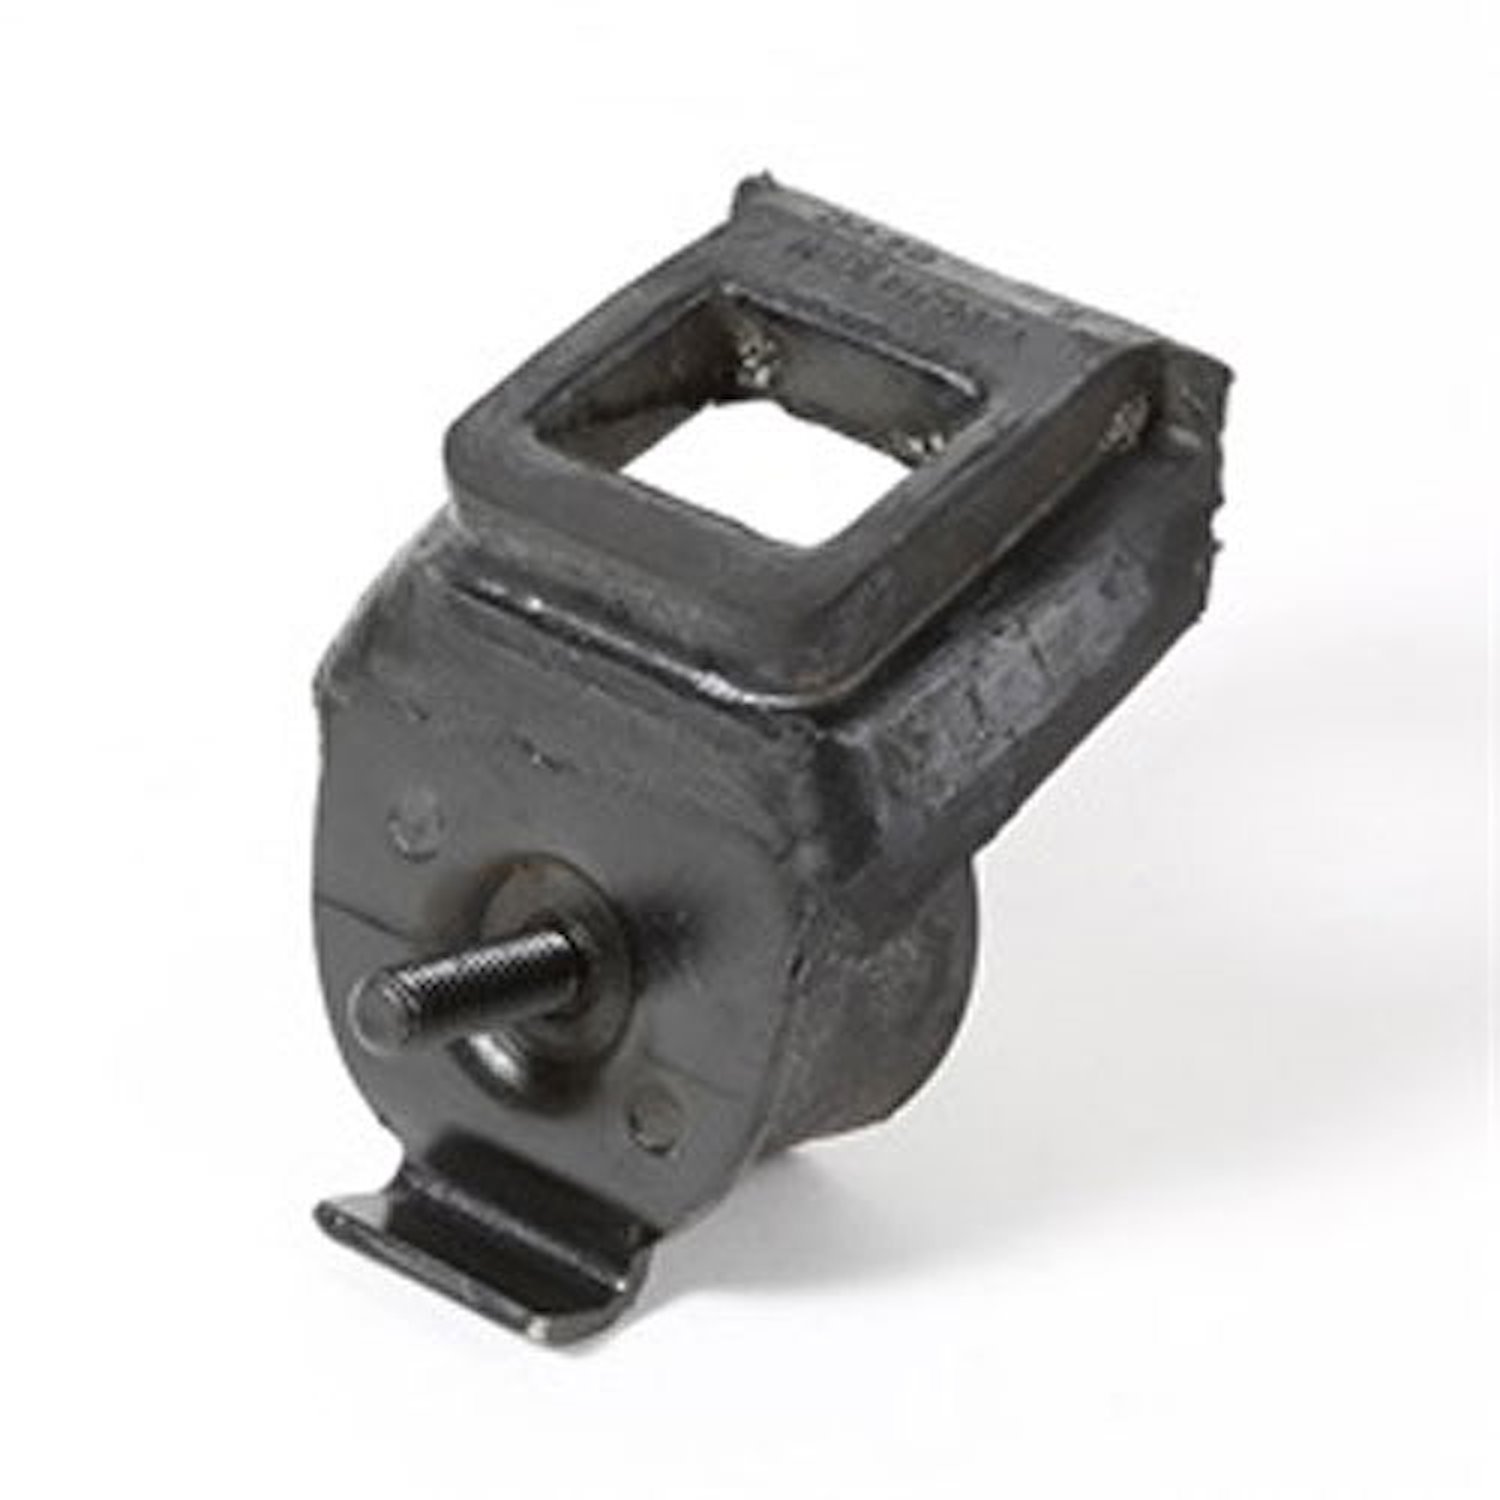 This front engine mount from Omix-ADA fits the